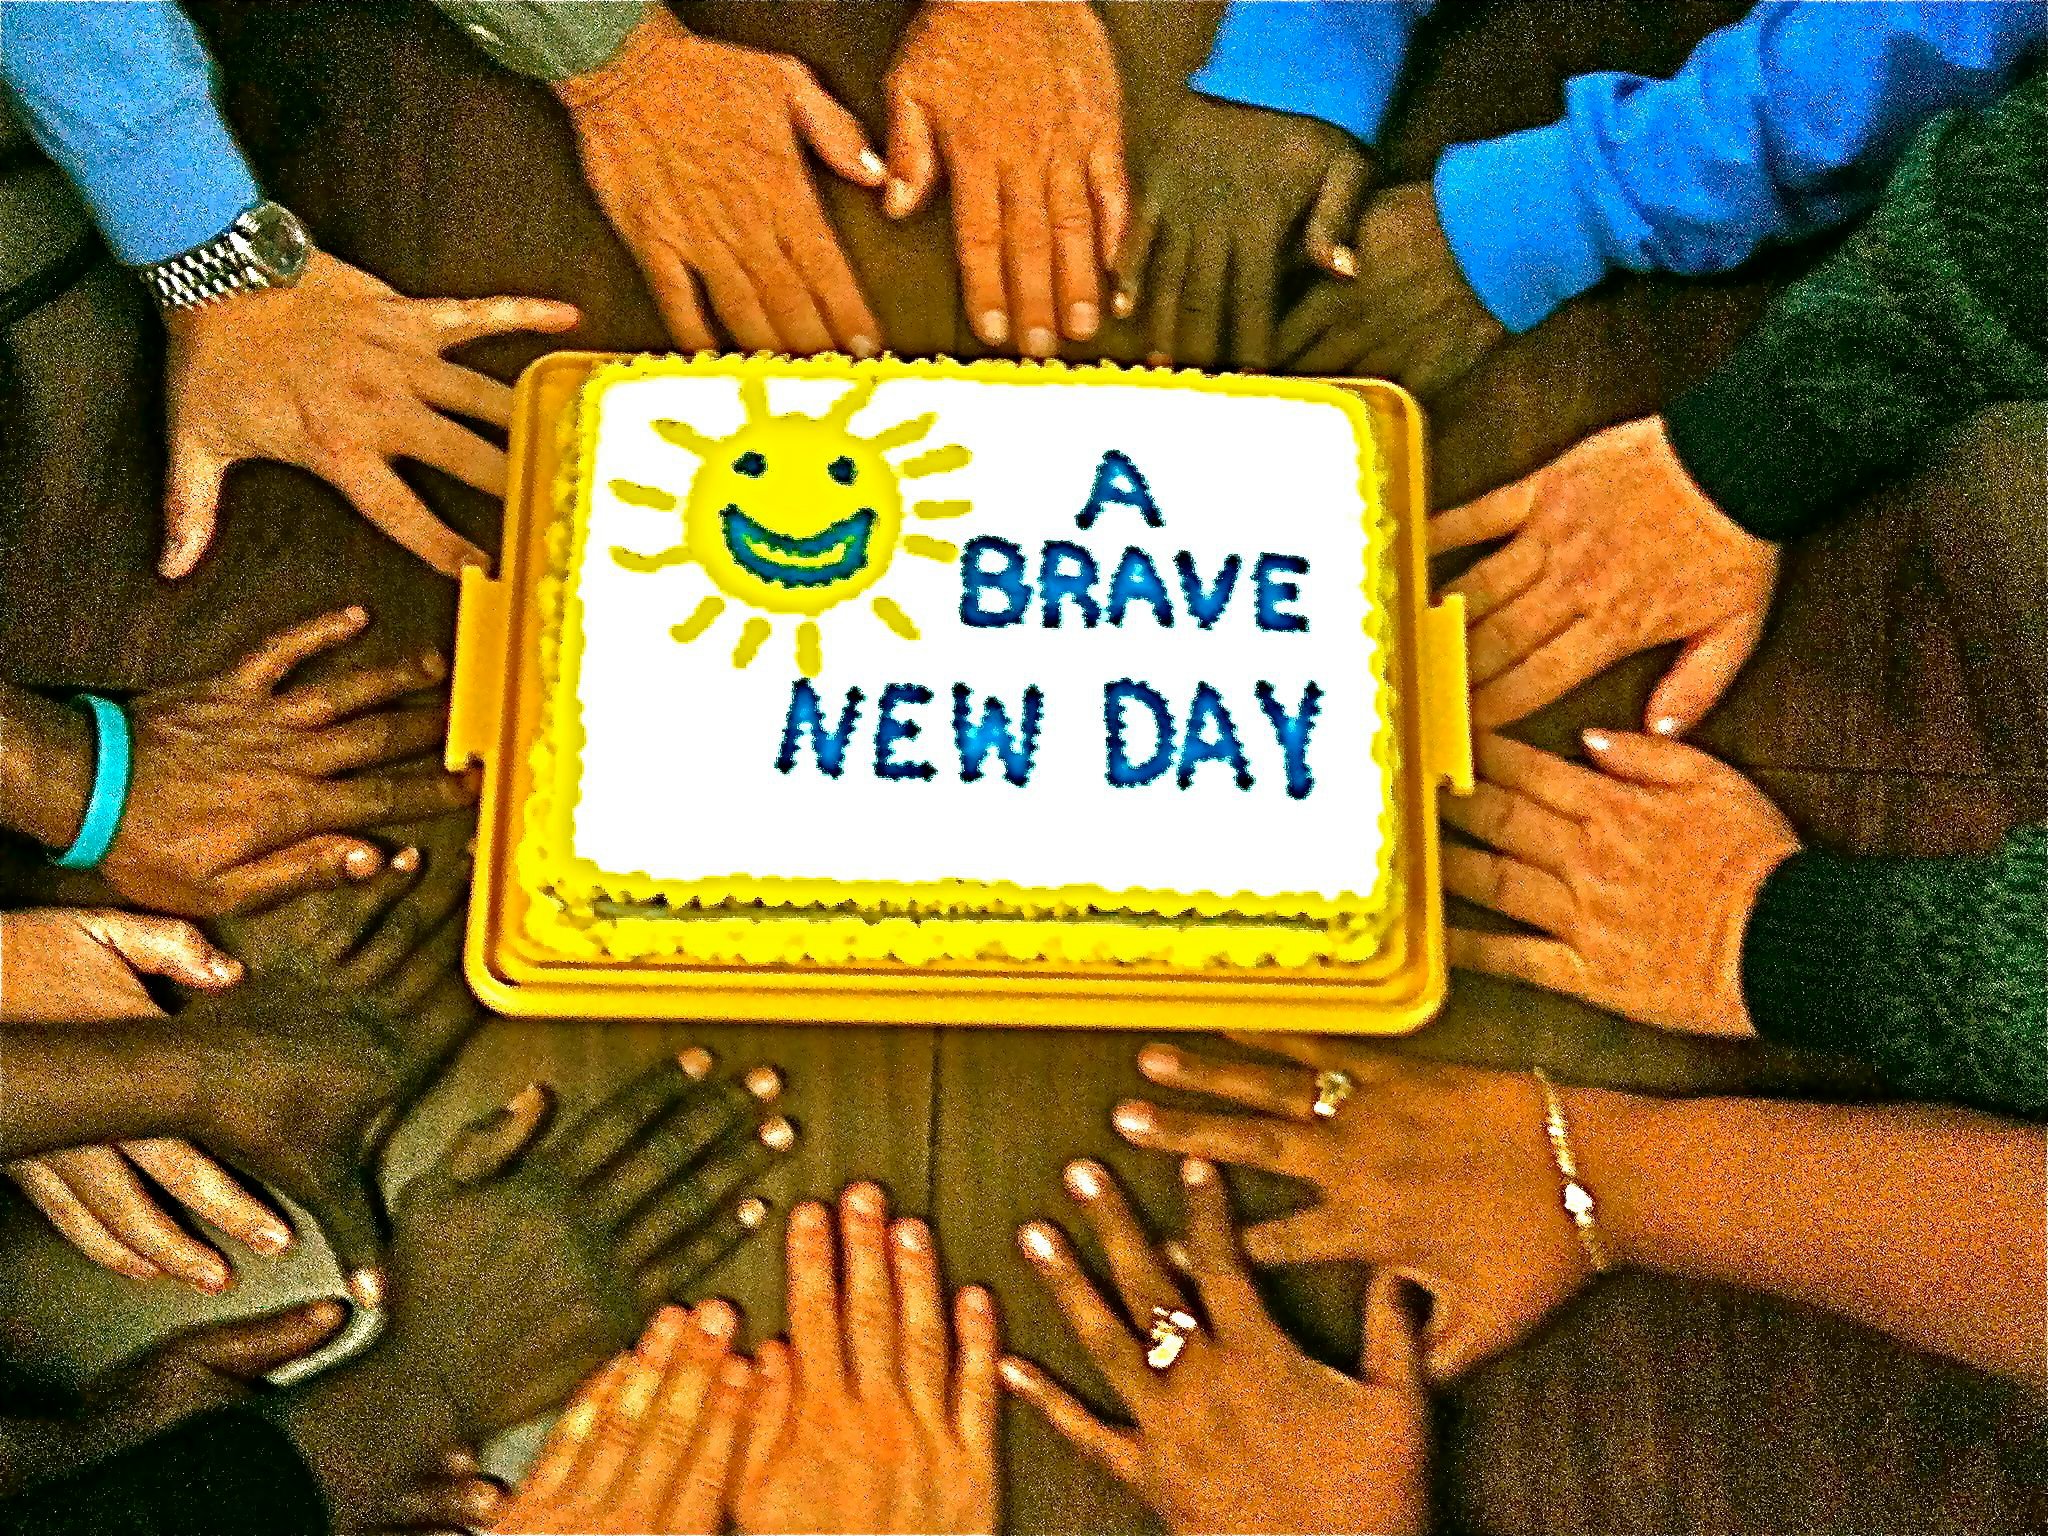 A Brave New Day